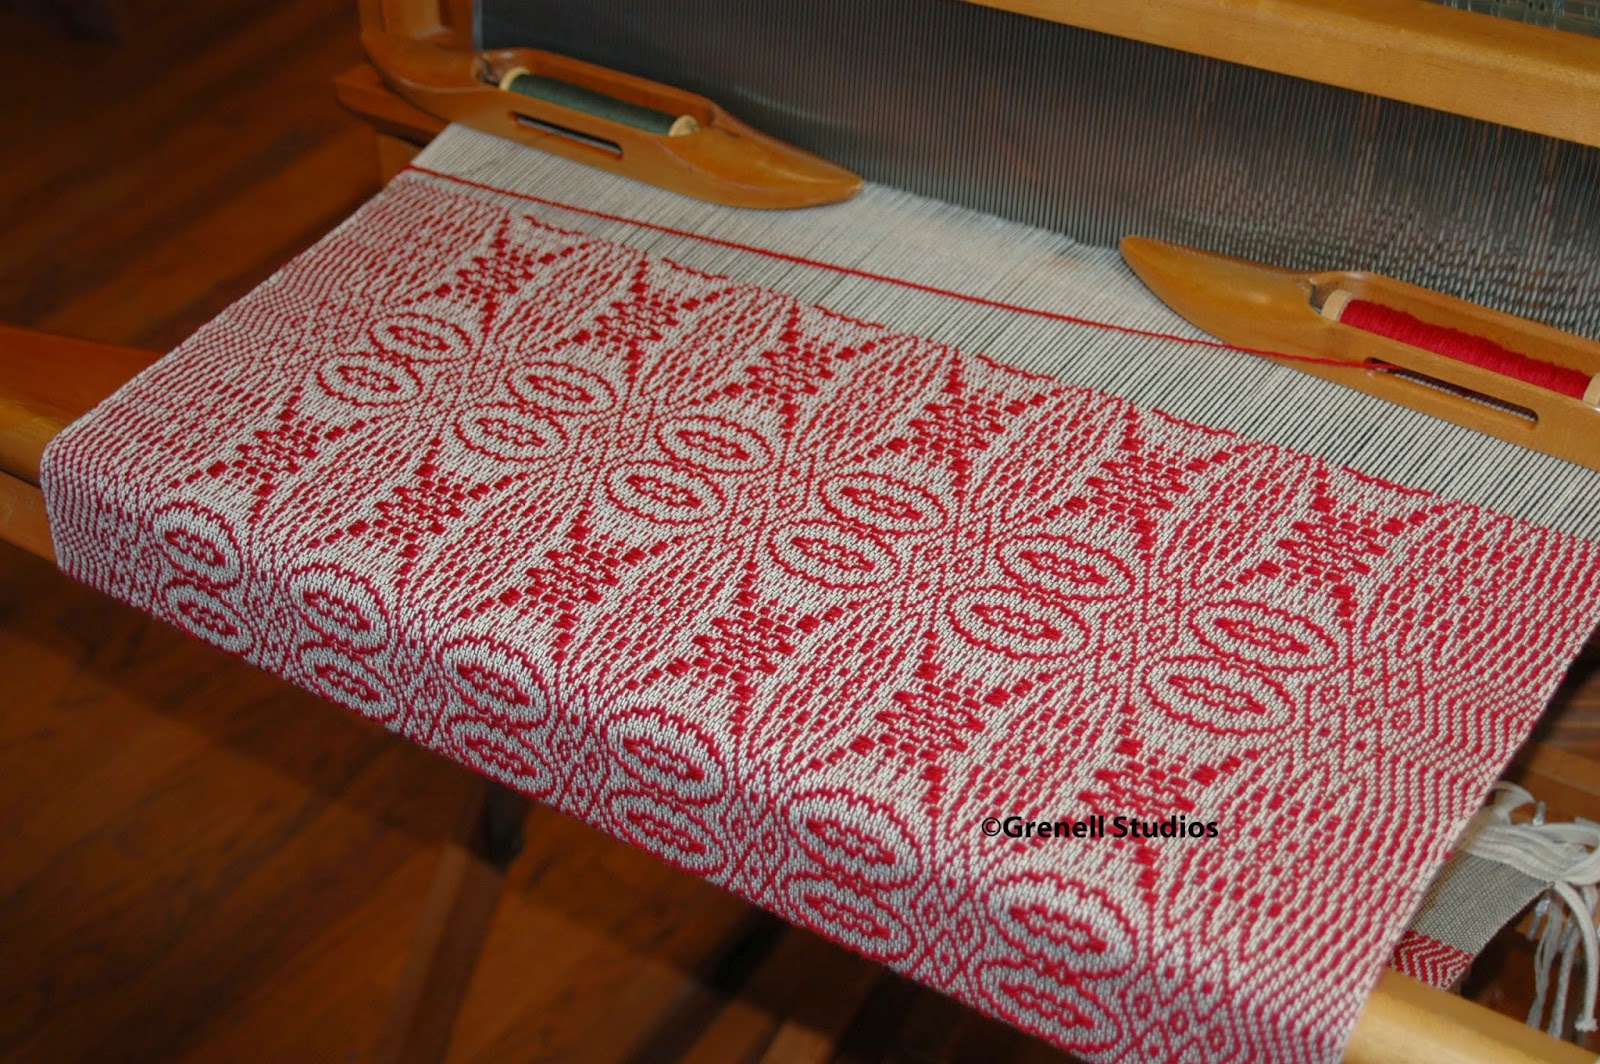 Shuttle, Hook and Needle Woven Christmas Table Runners